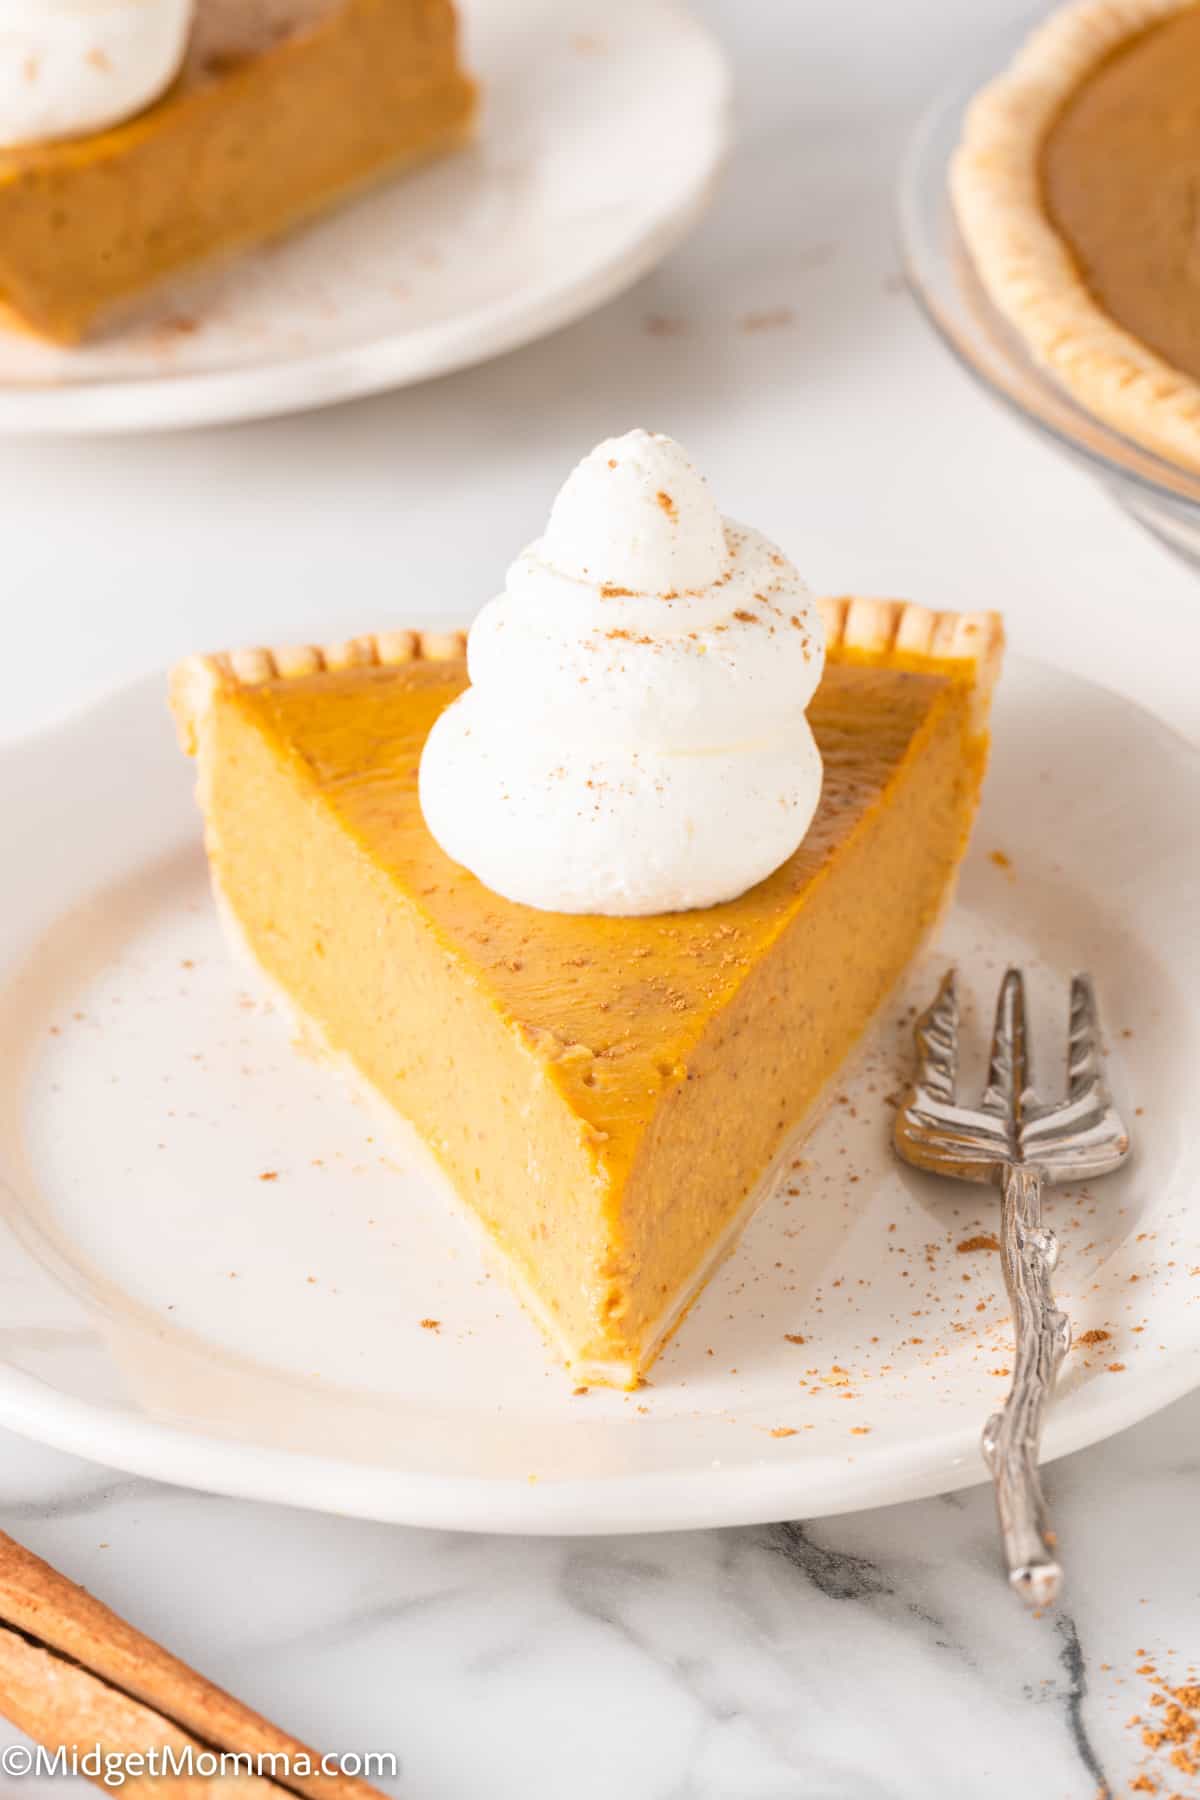 Front view photo of a slice of Maple Pumpkin Pie topped with whipped cream